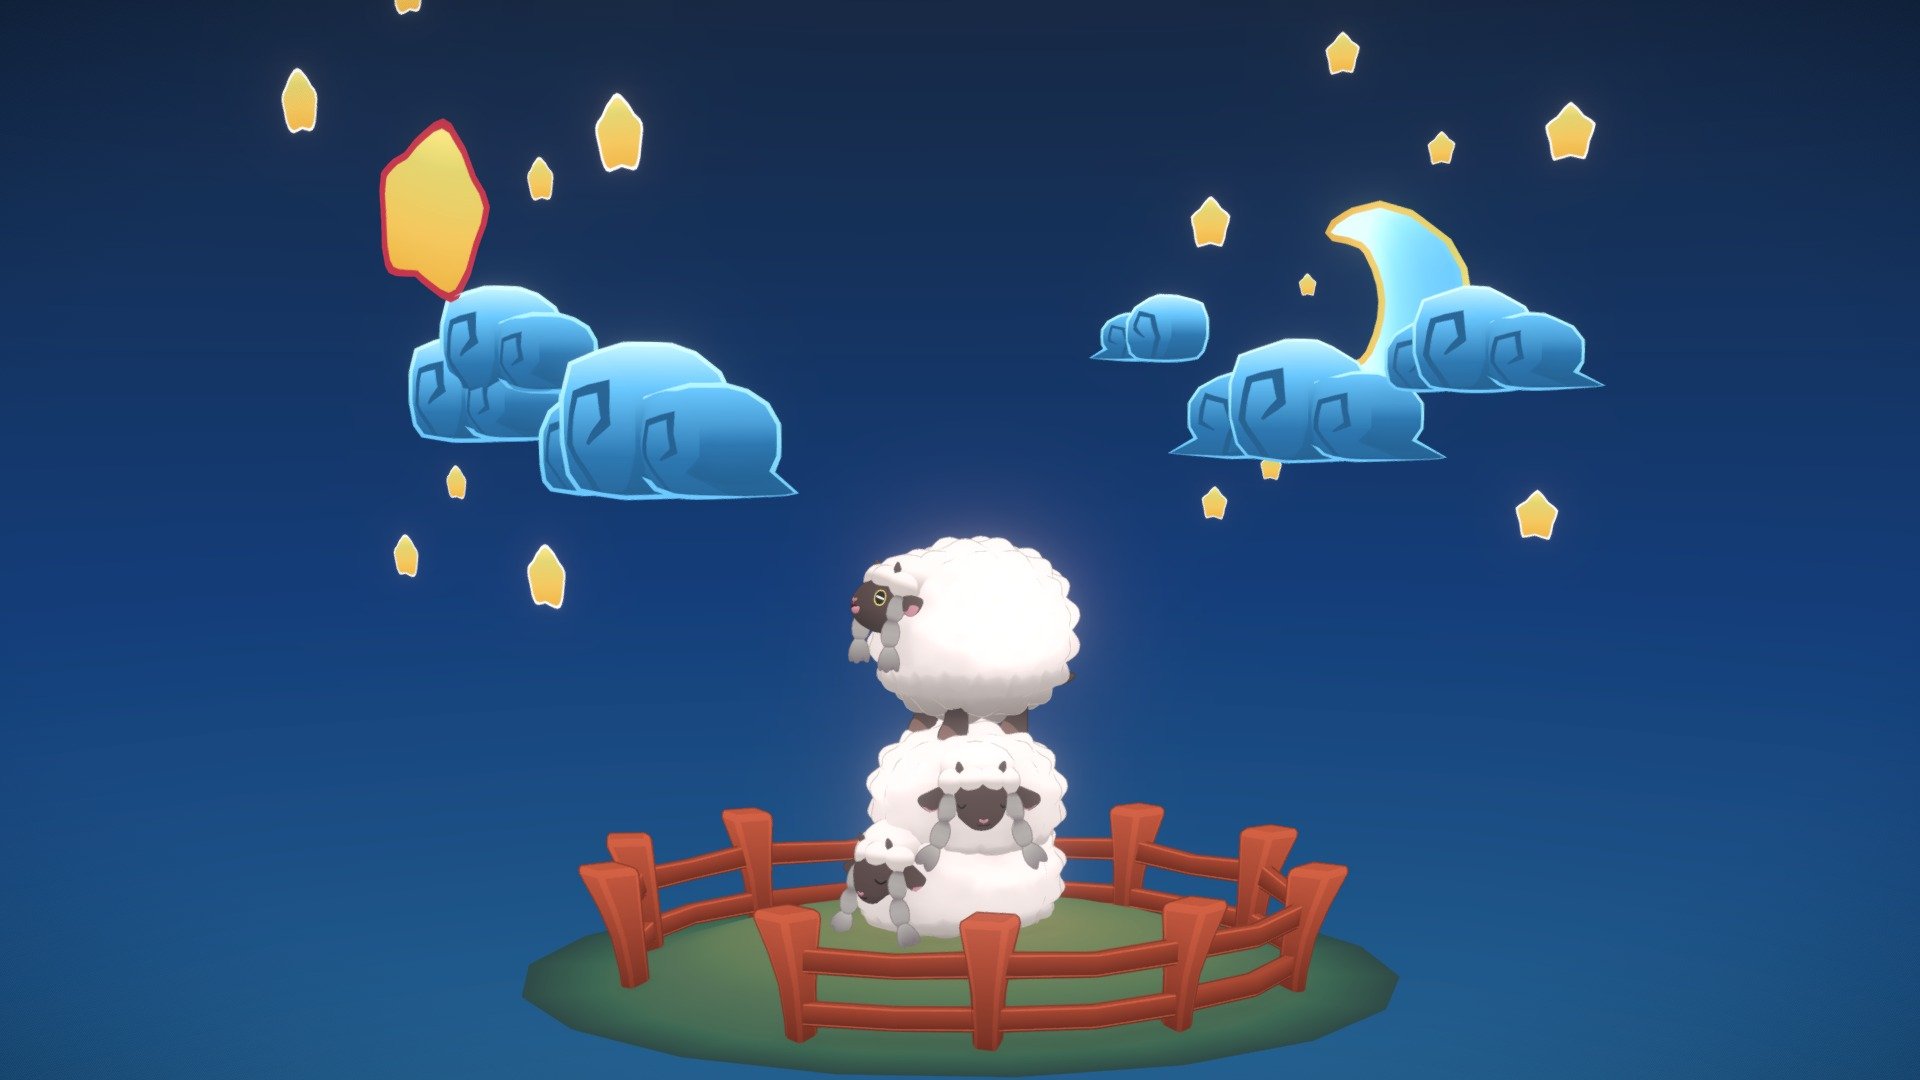 Adorable Wooloo looking at the stars

A small diorama to start the week, textured with a gradient panel, modeled in blender.

For more models of this style visit my profile or stop by my store

You can also support me by giving me a coffee as a gift—https://ko-fi.com/ergoni - ⭐Pokemon Wooloo⭐ - Download Free 3D model by Ergoni 3d model